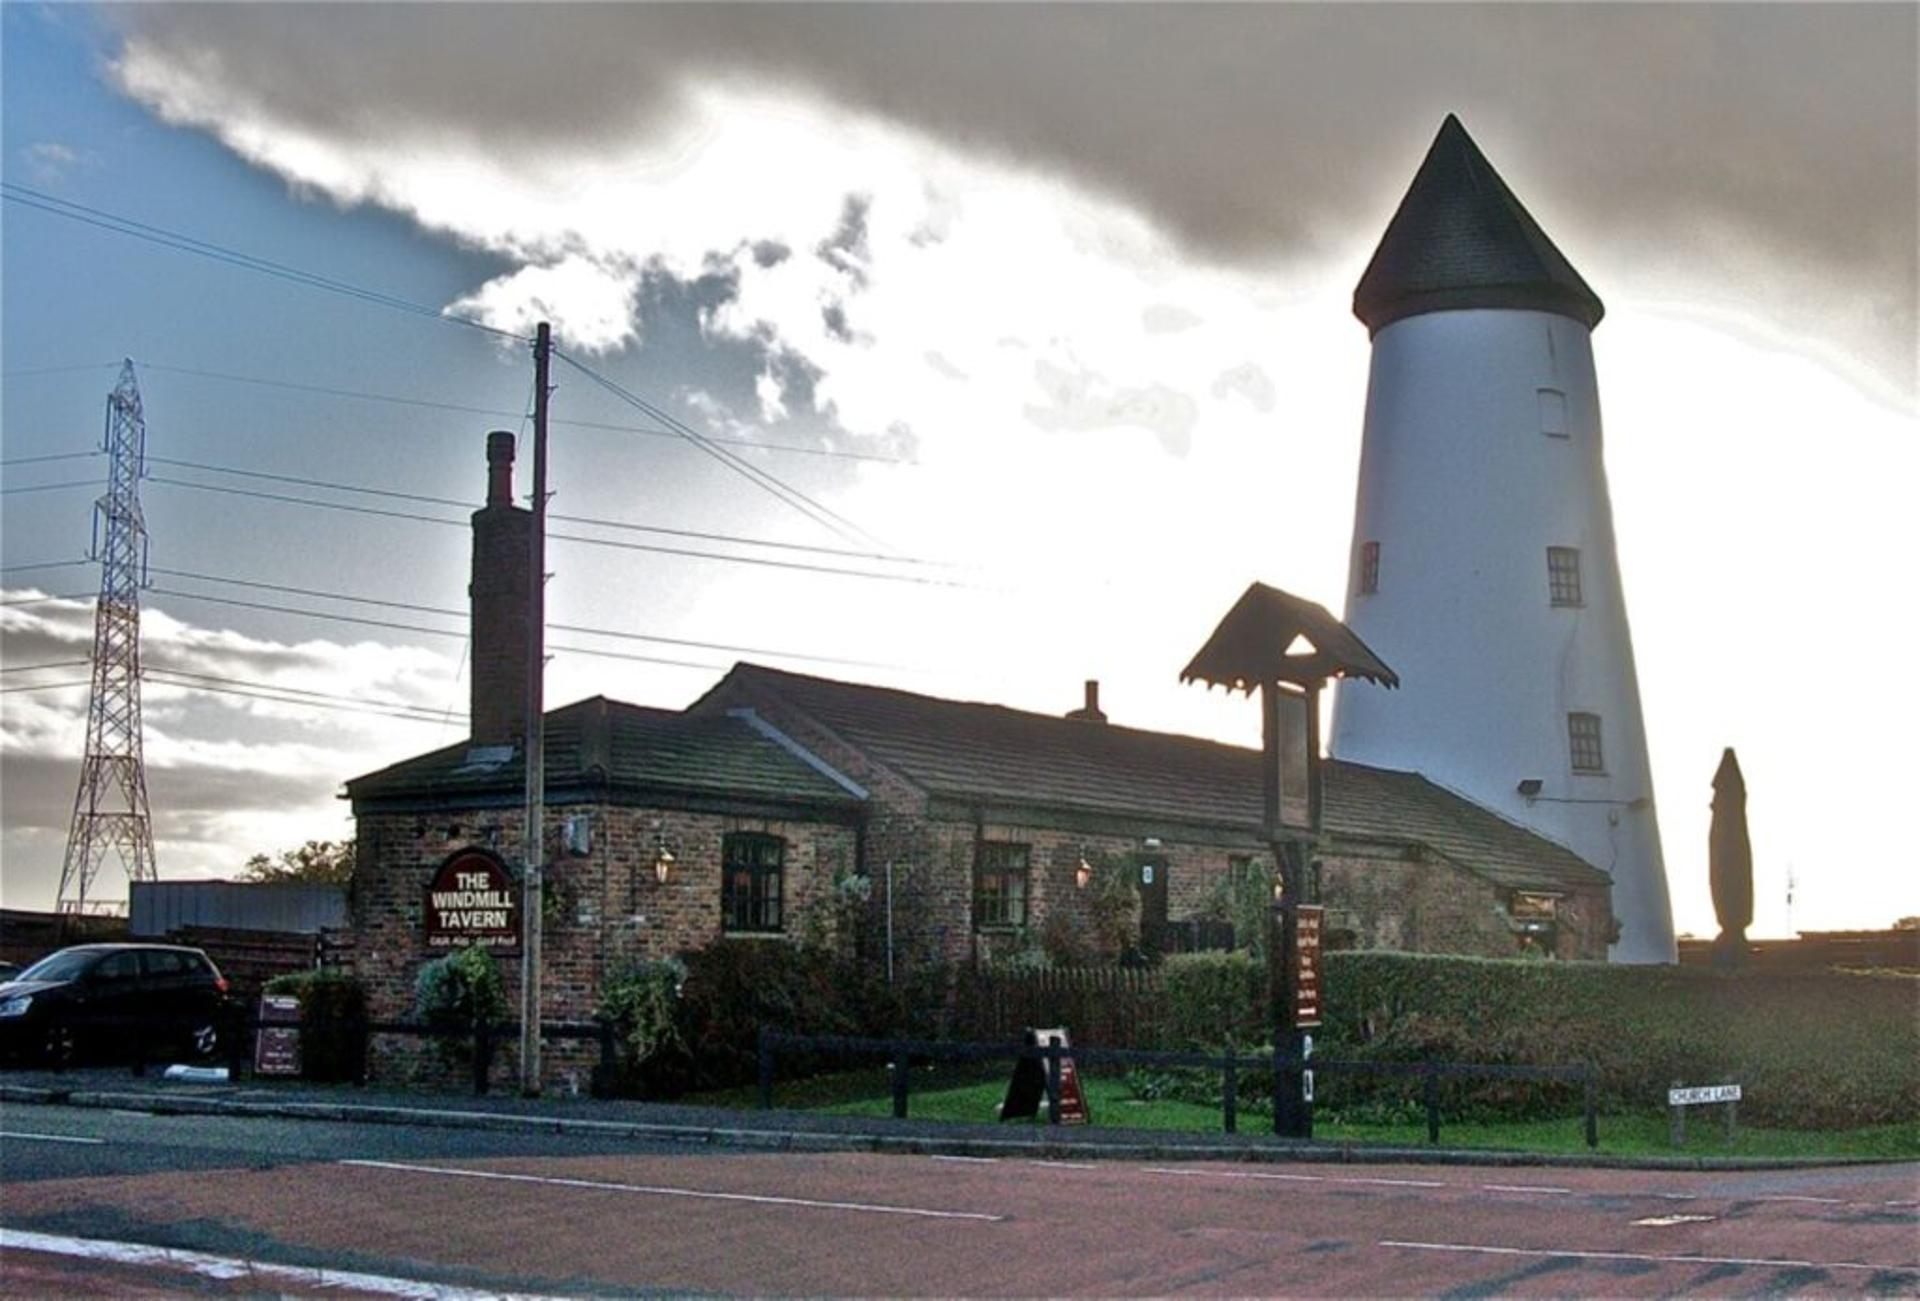 Lancashire pub with listed windmill up for sale for £325k